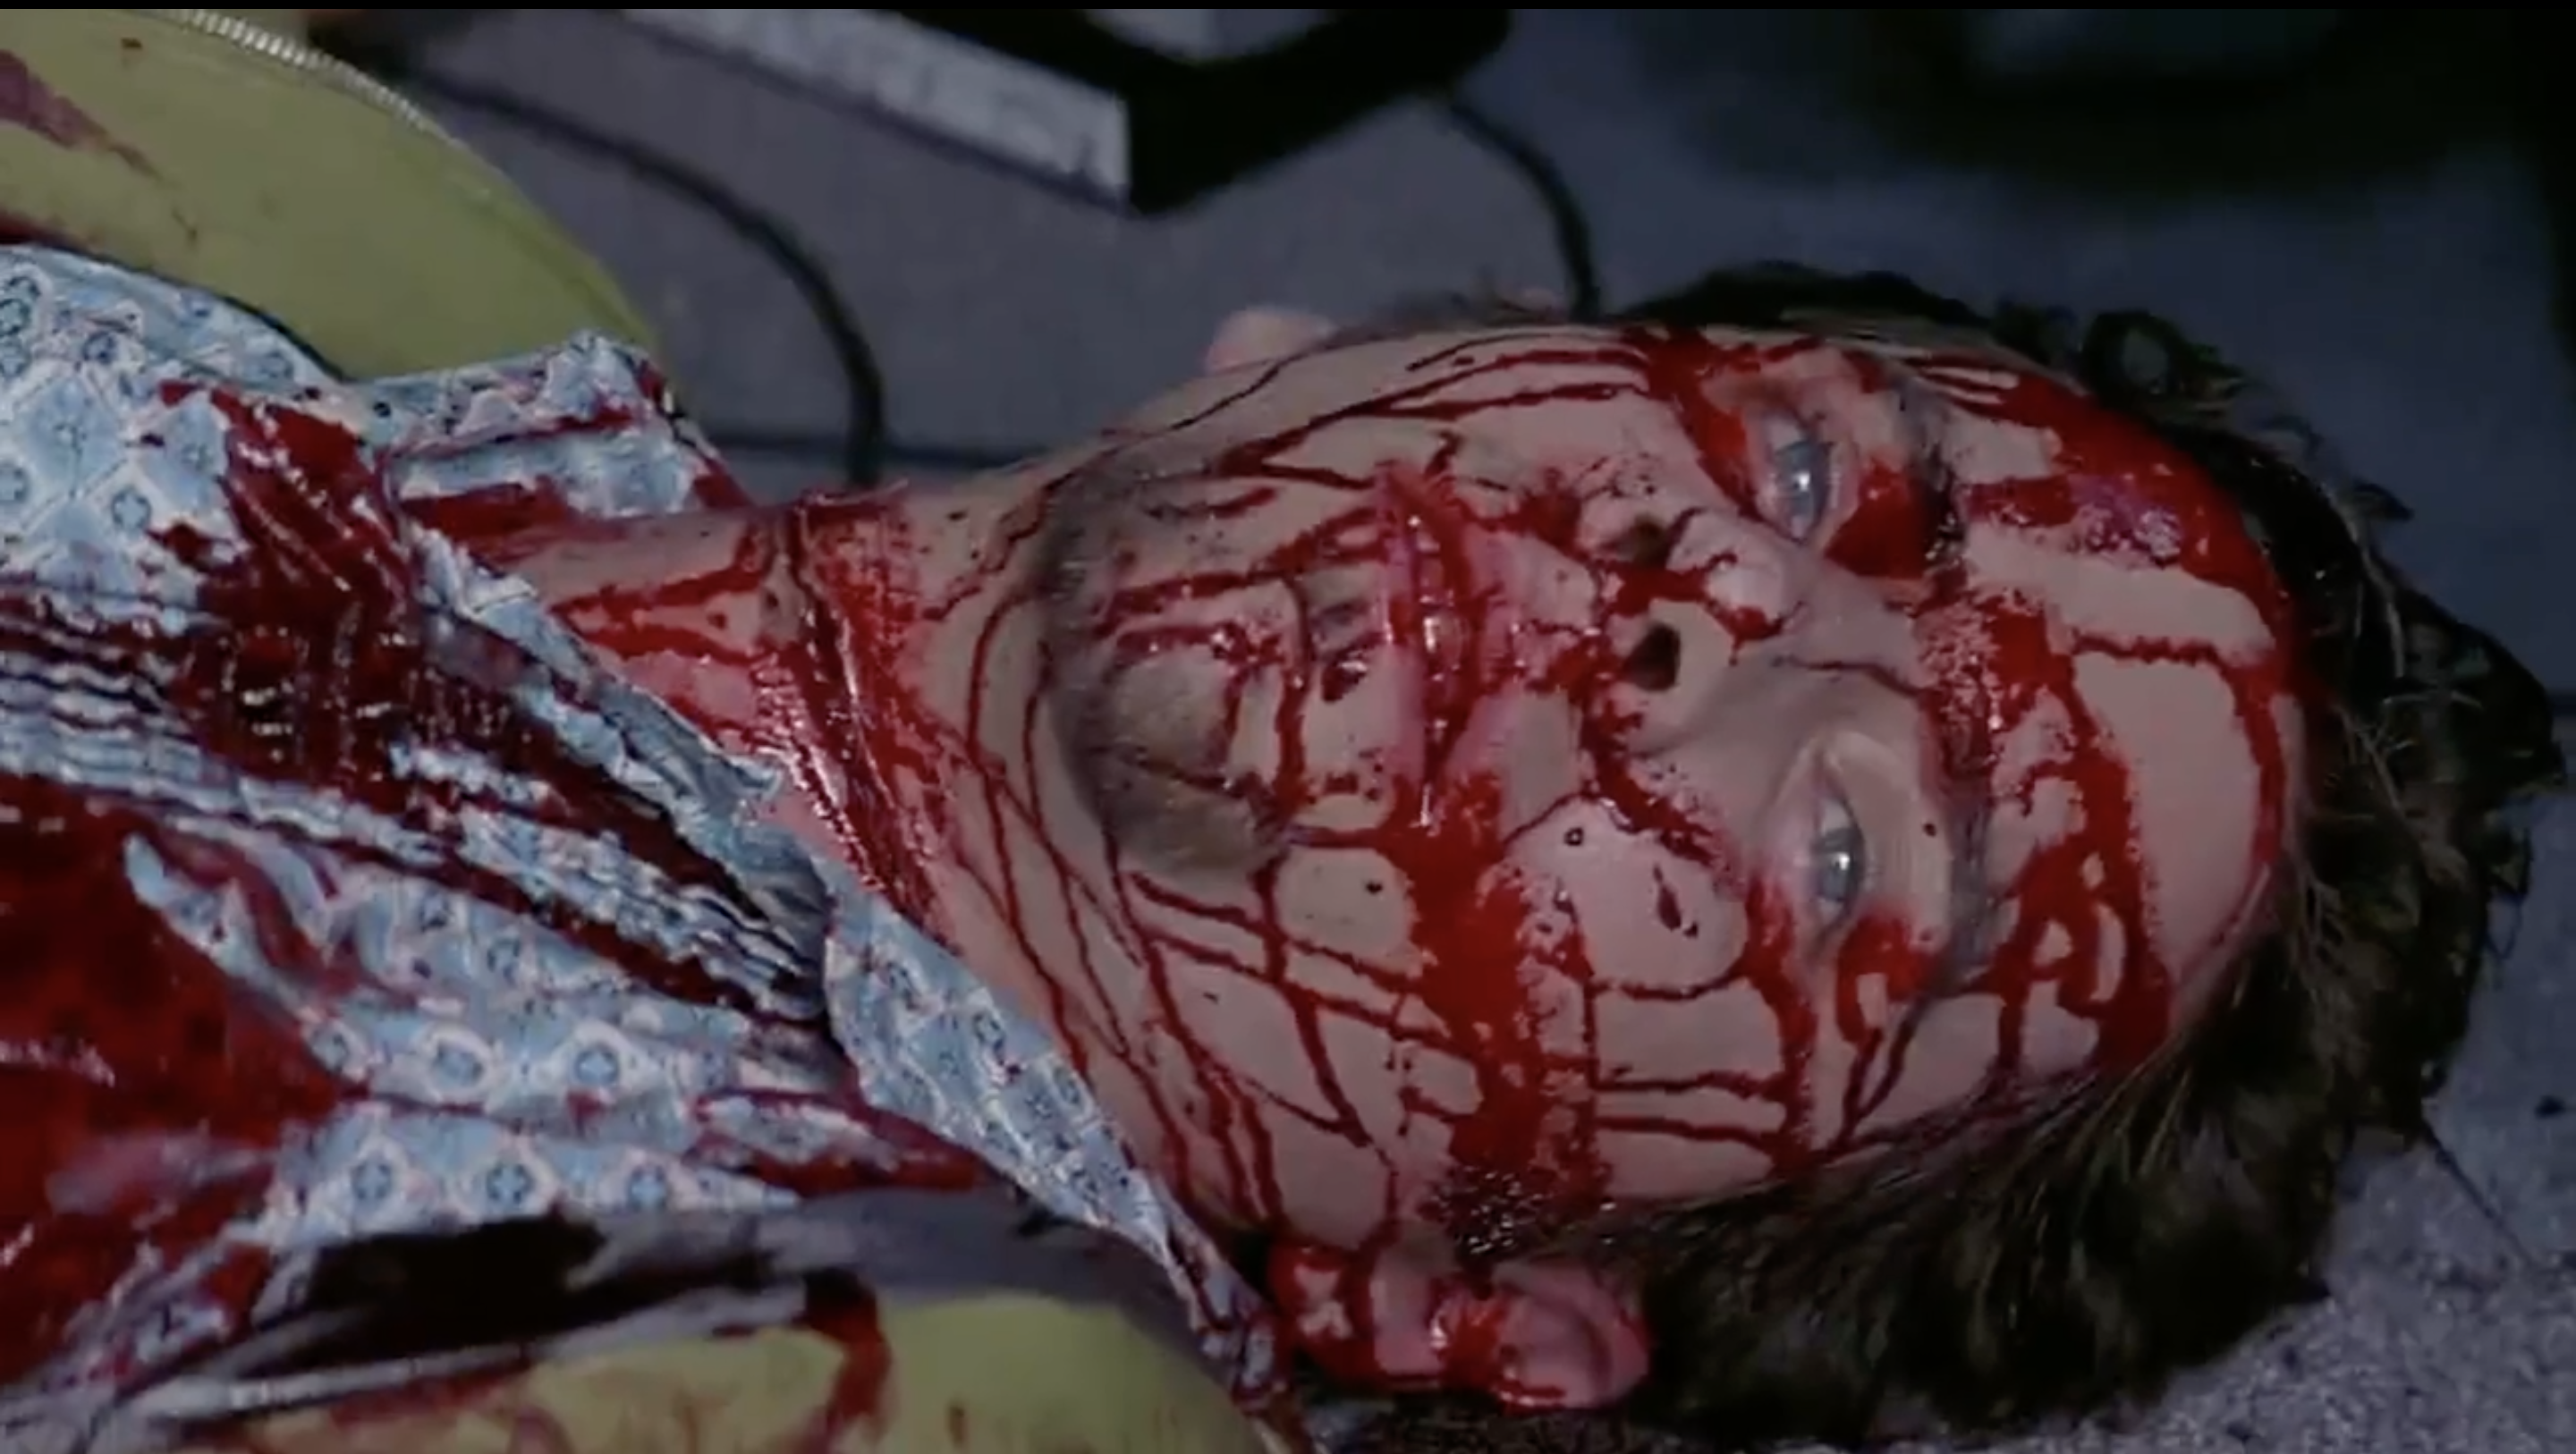 Jamie Kennedy lies dead with blood all over his face